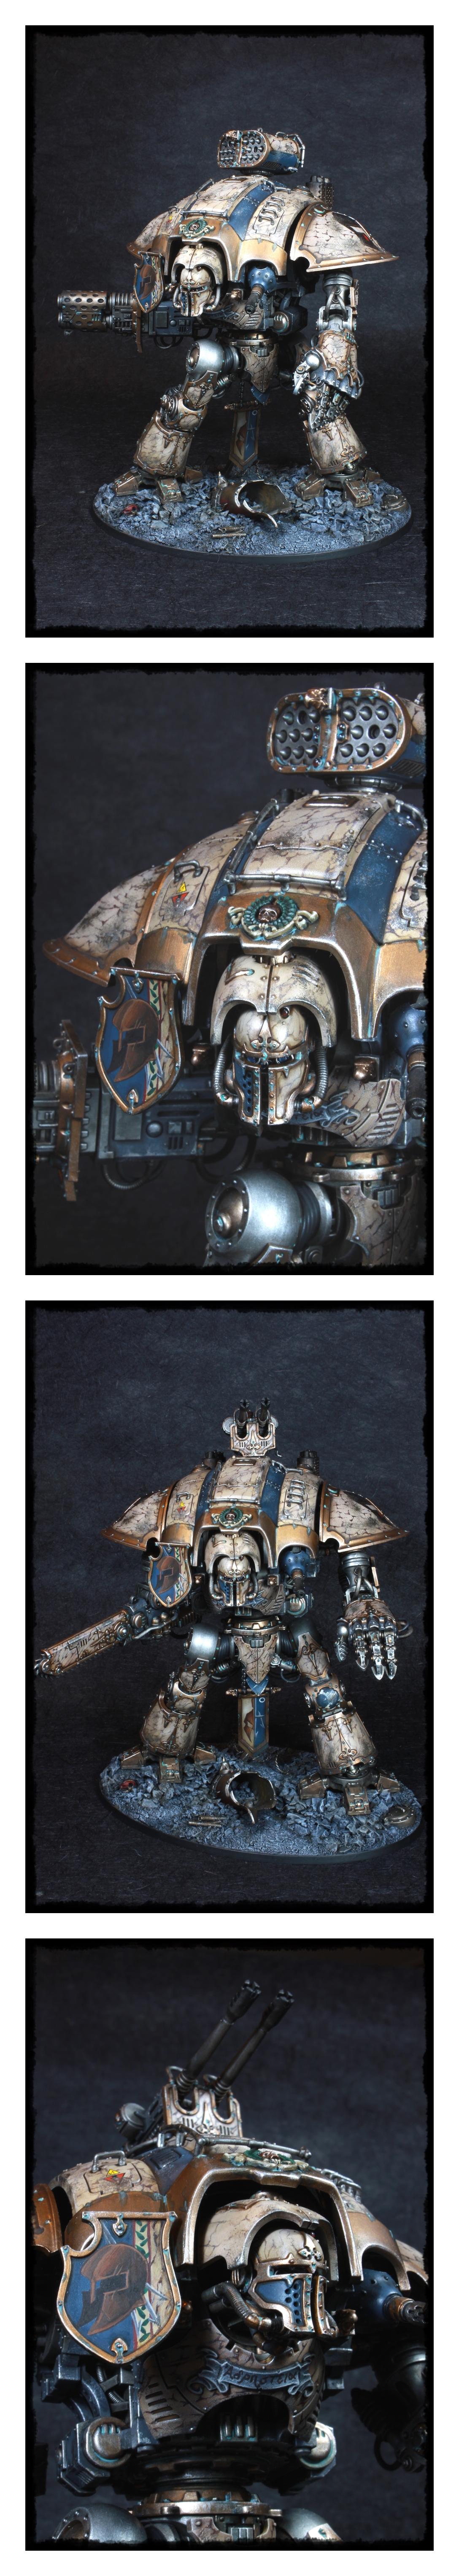 'the Orphan's Wrath', Achlys Iii, Freeblade, Imperial Knight, Knight Titan, Magnet, Marble, Sarpedon, Warhammer 40,000